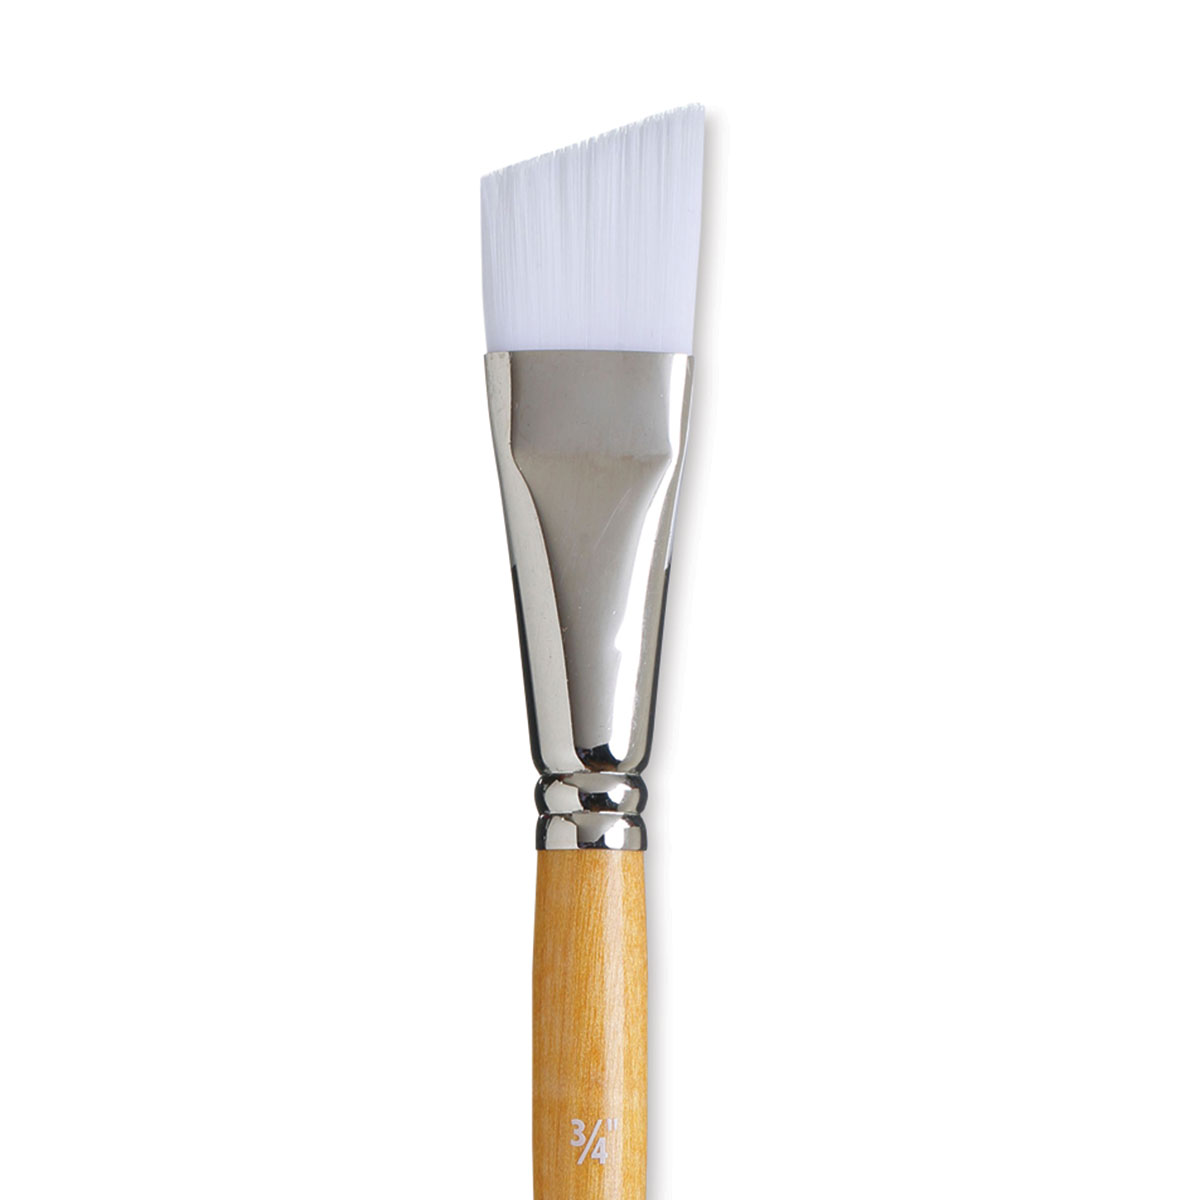 Princeton SNAP! Series 9850 White Soft Synthetic Brushes and Set